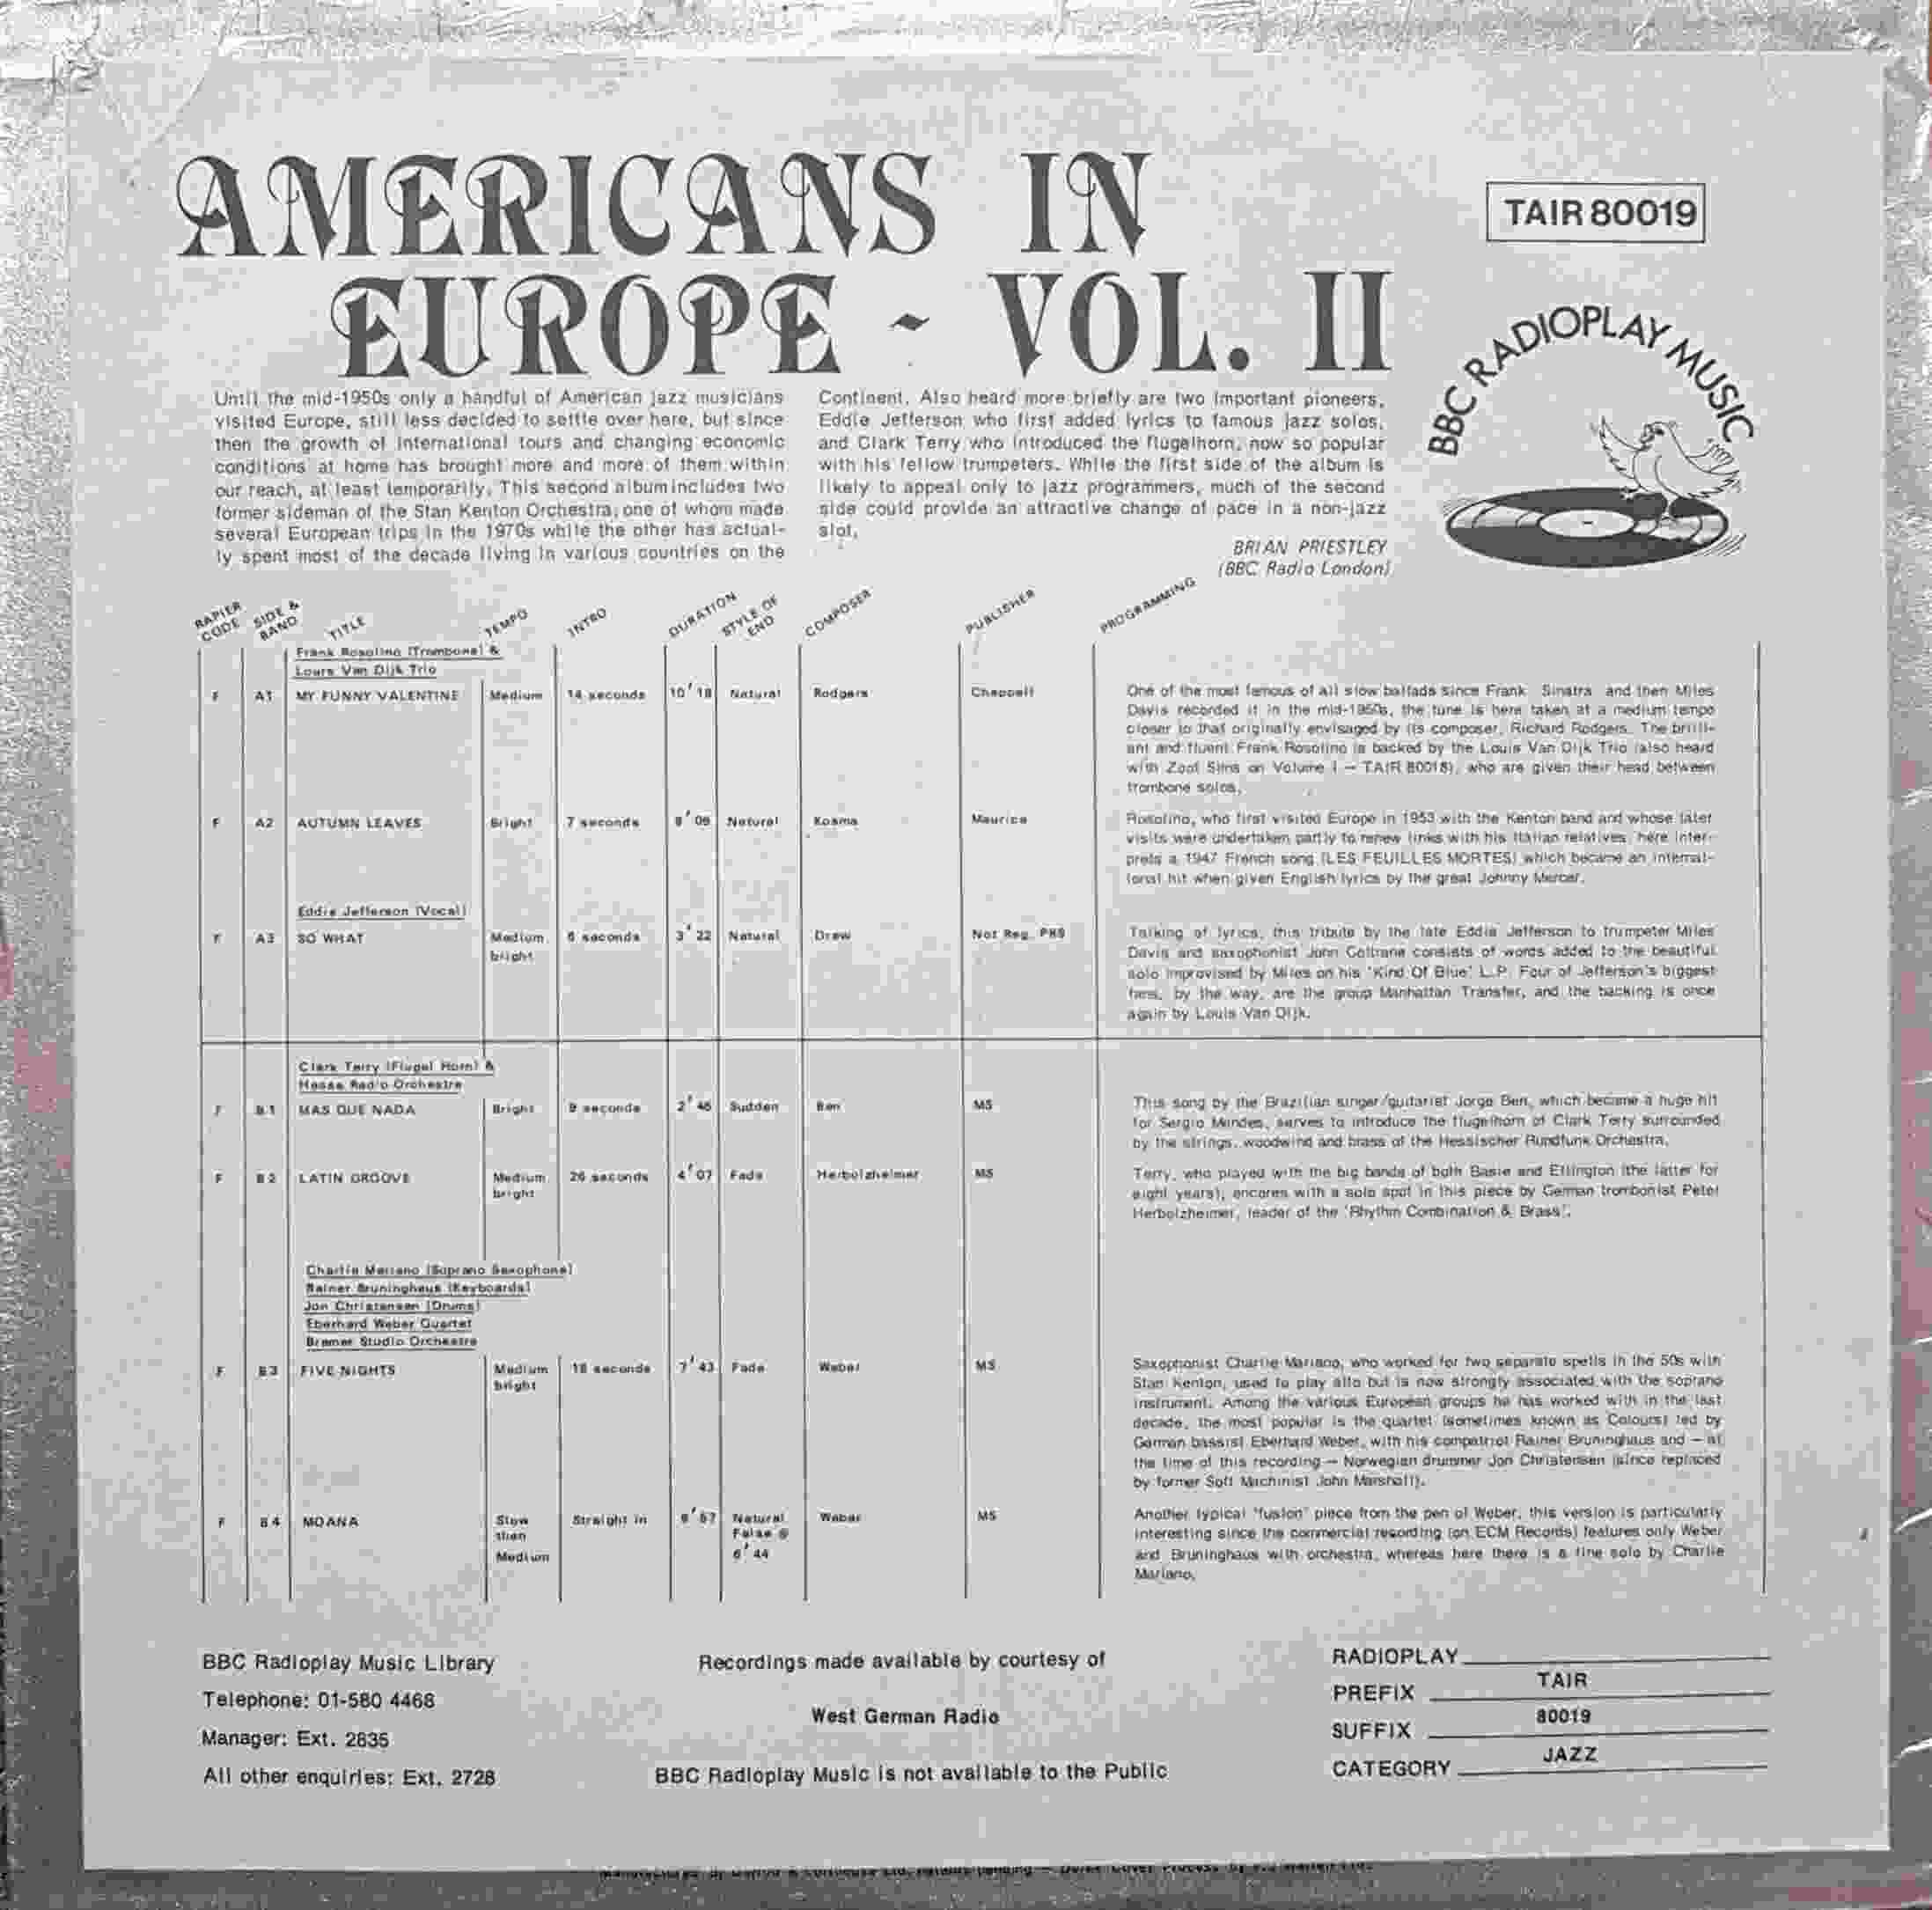 Picture of TAIR 80019 Americans in Europe - Vol. 2 by artist Various from the BBC records and Tapes library